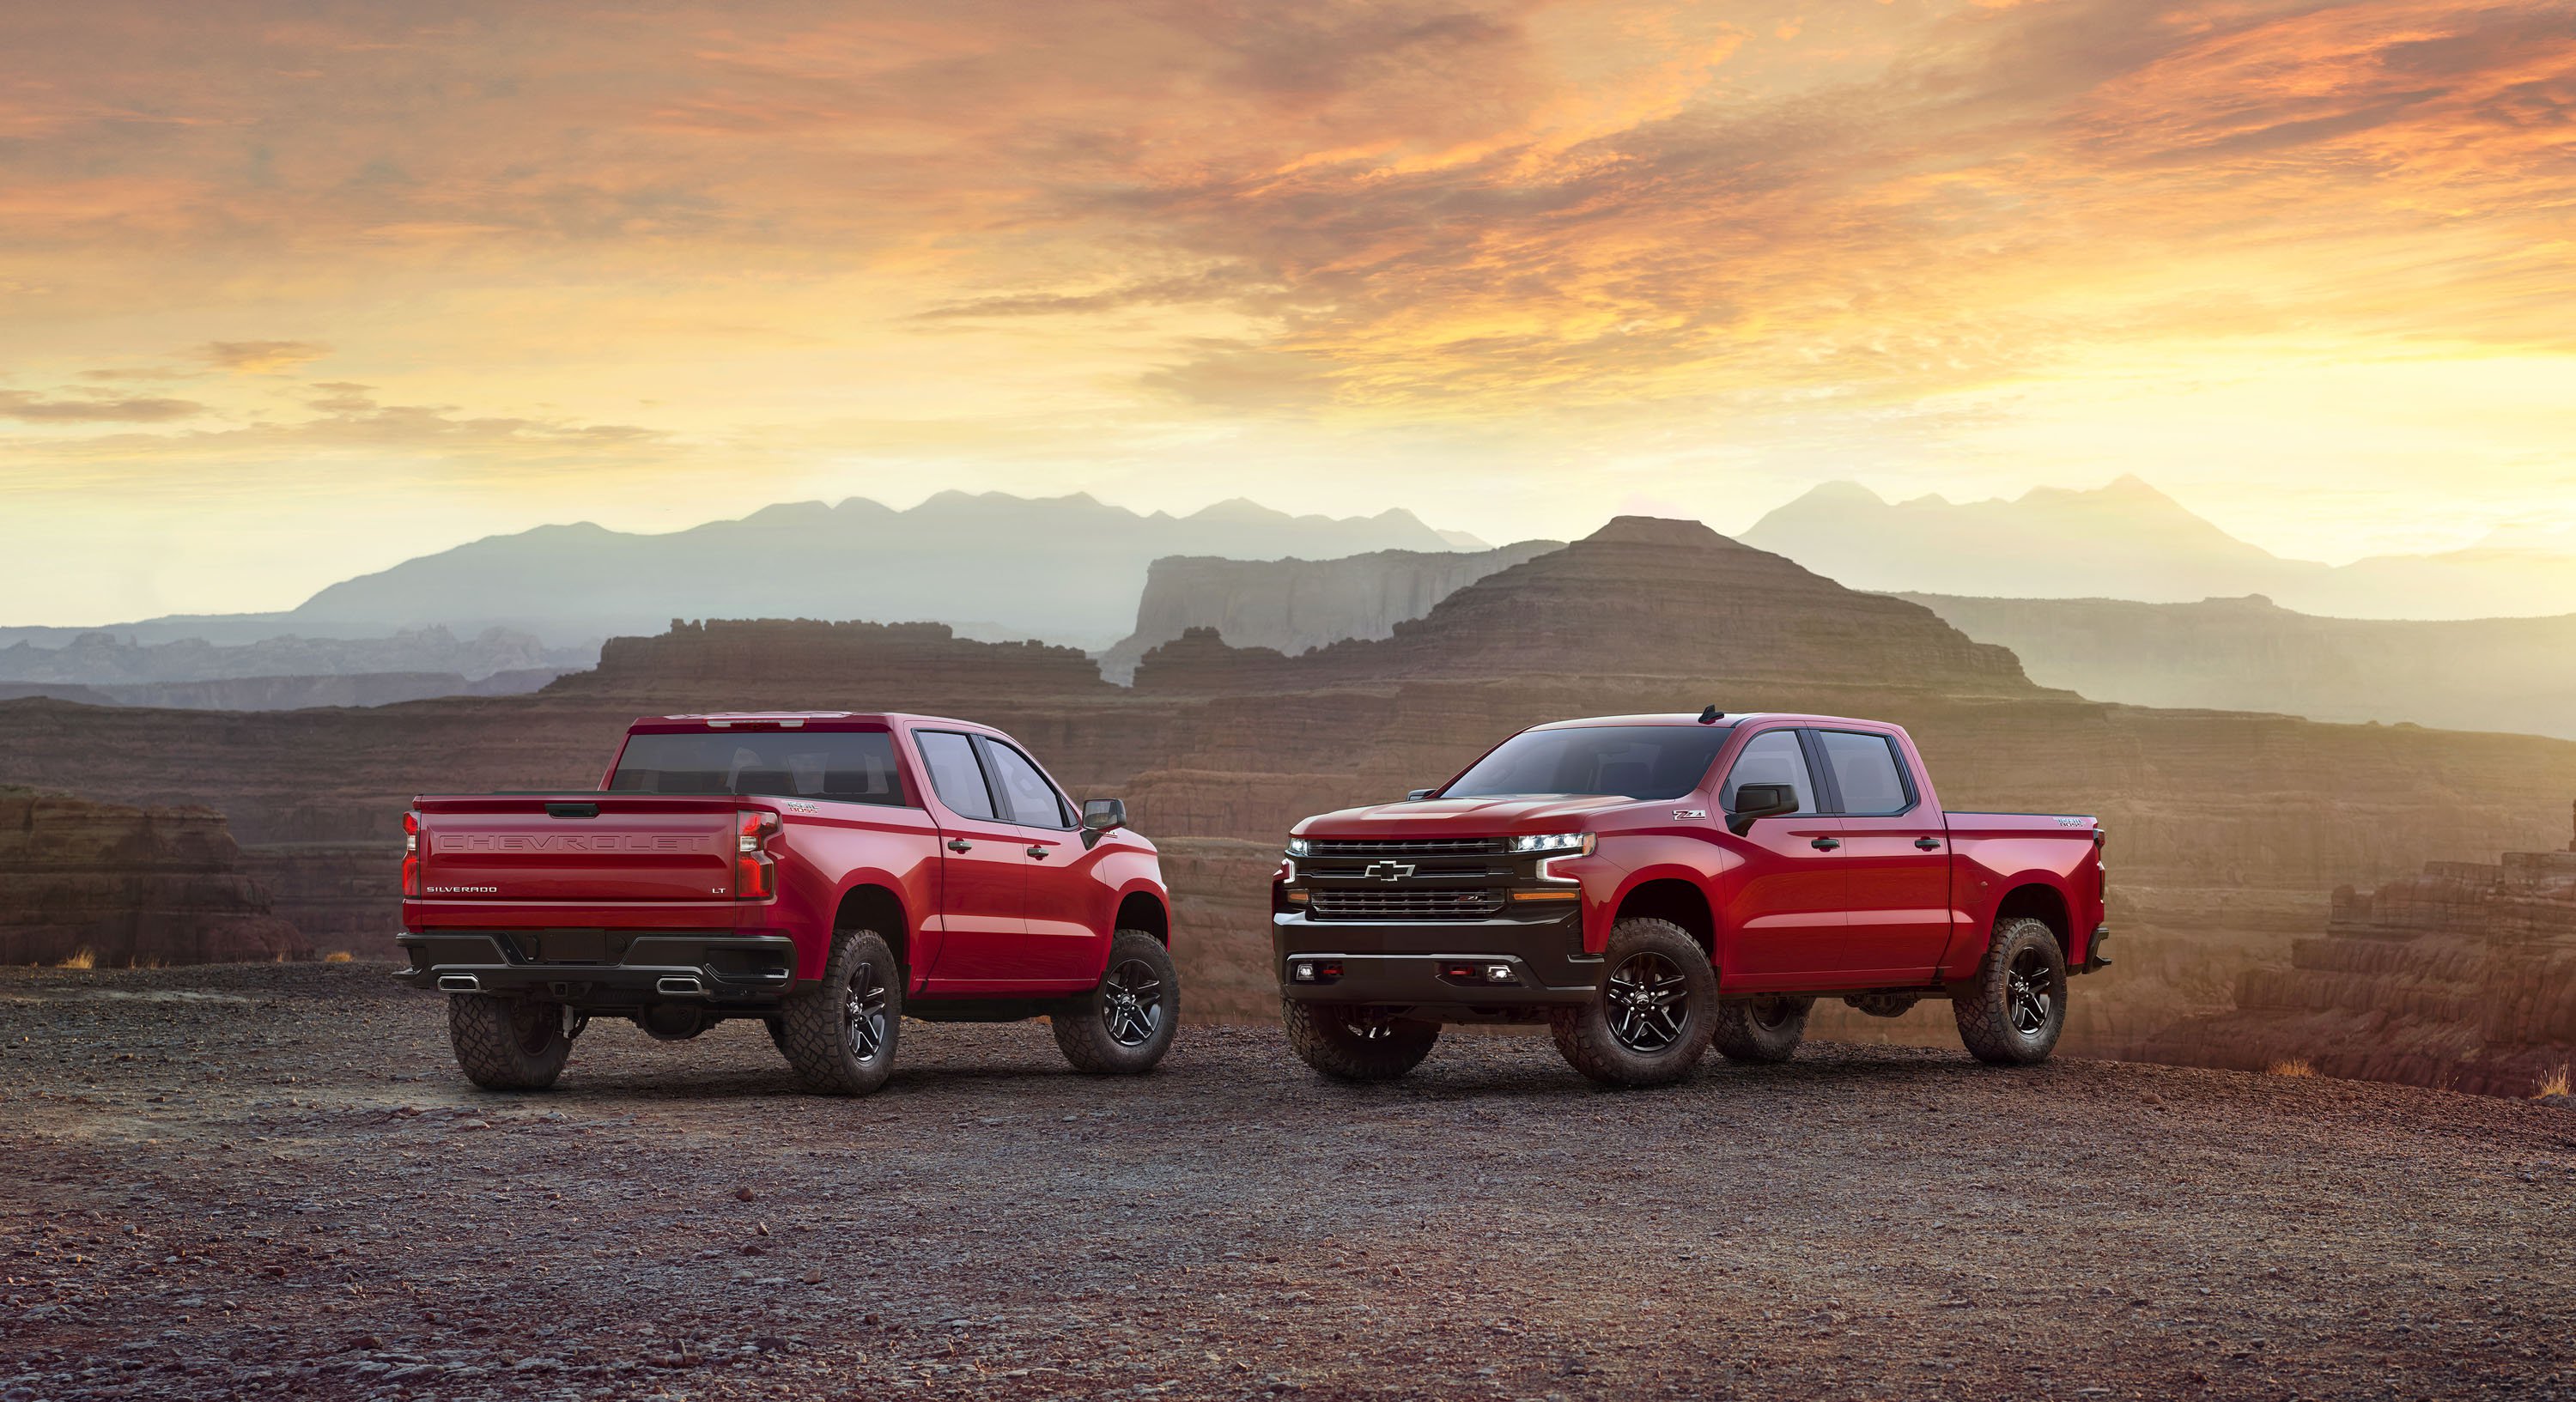 Wallpaper Selections Of The Day - 2018 Silverado Trail Boss , HD Wallpaper & Backgrounds